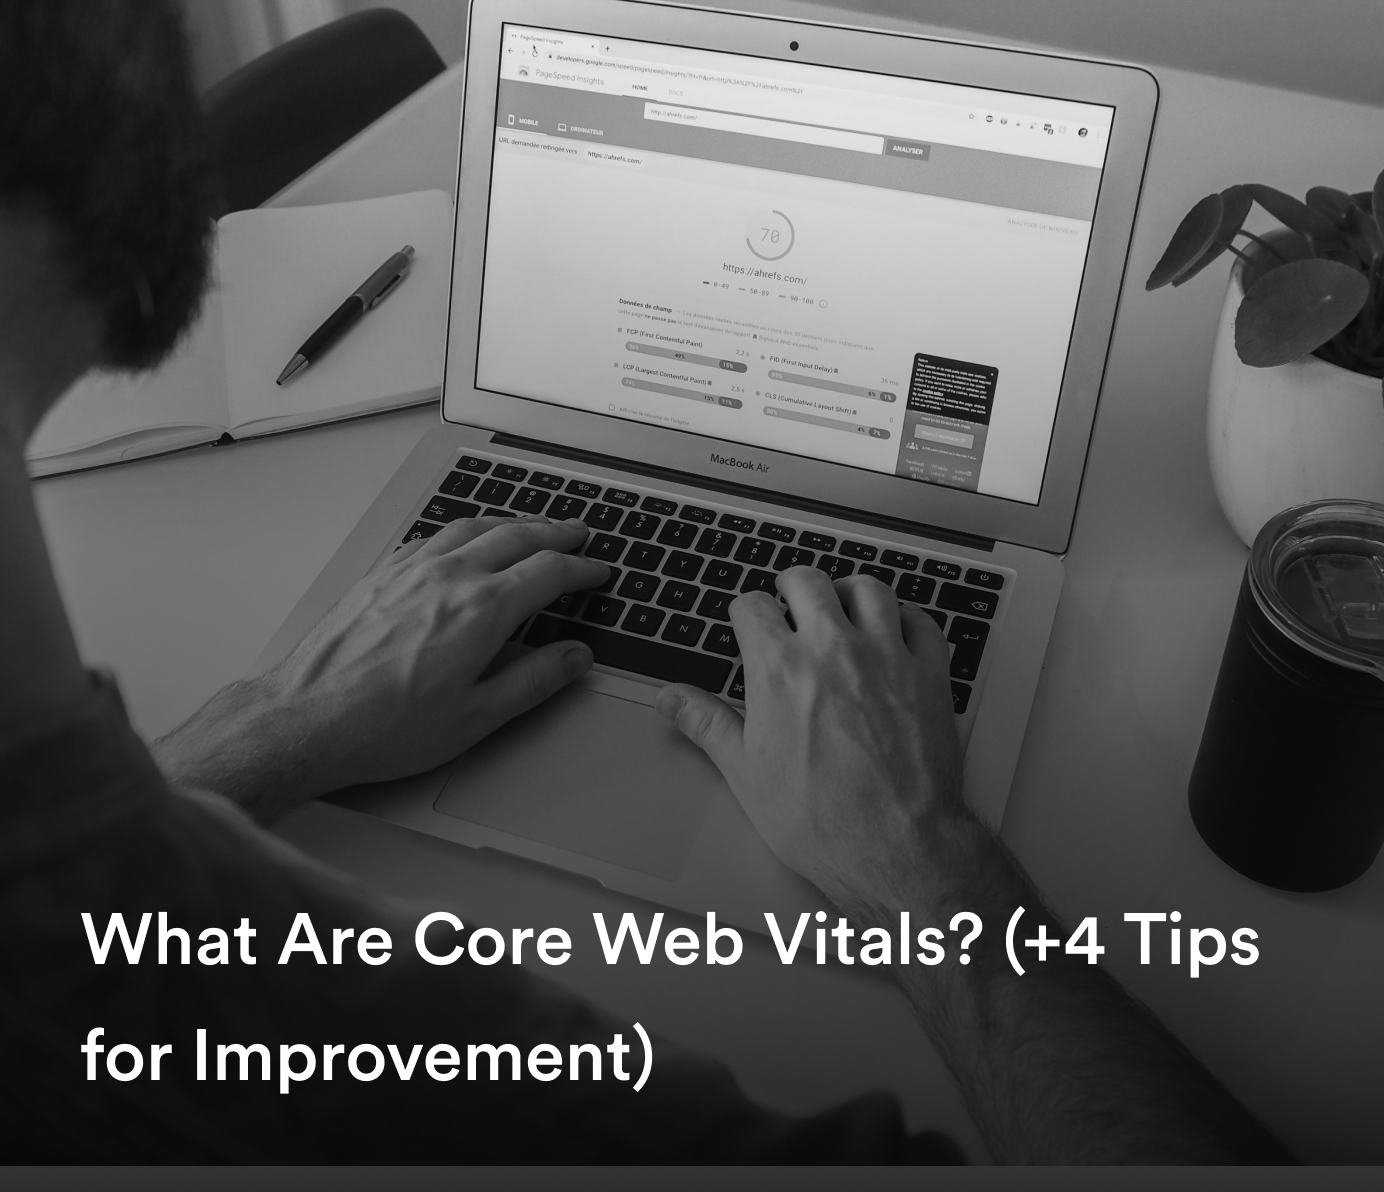 Black and white photo with text what are core web vitals +4 tips for improvement, male hands on laptop